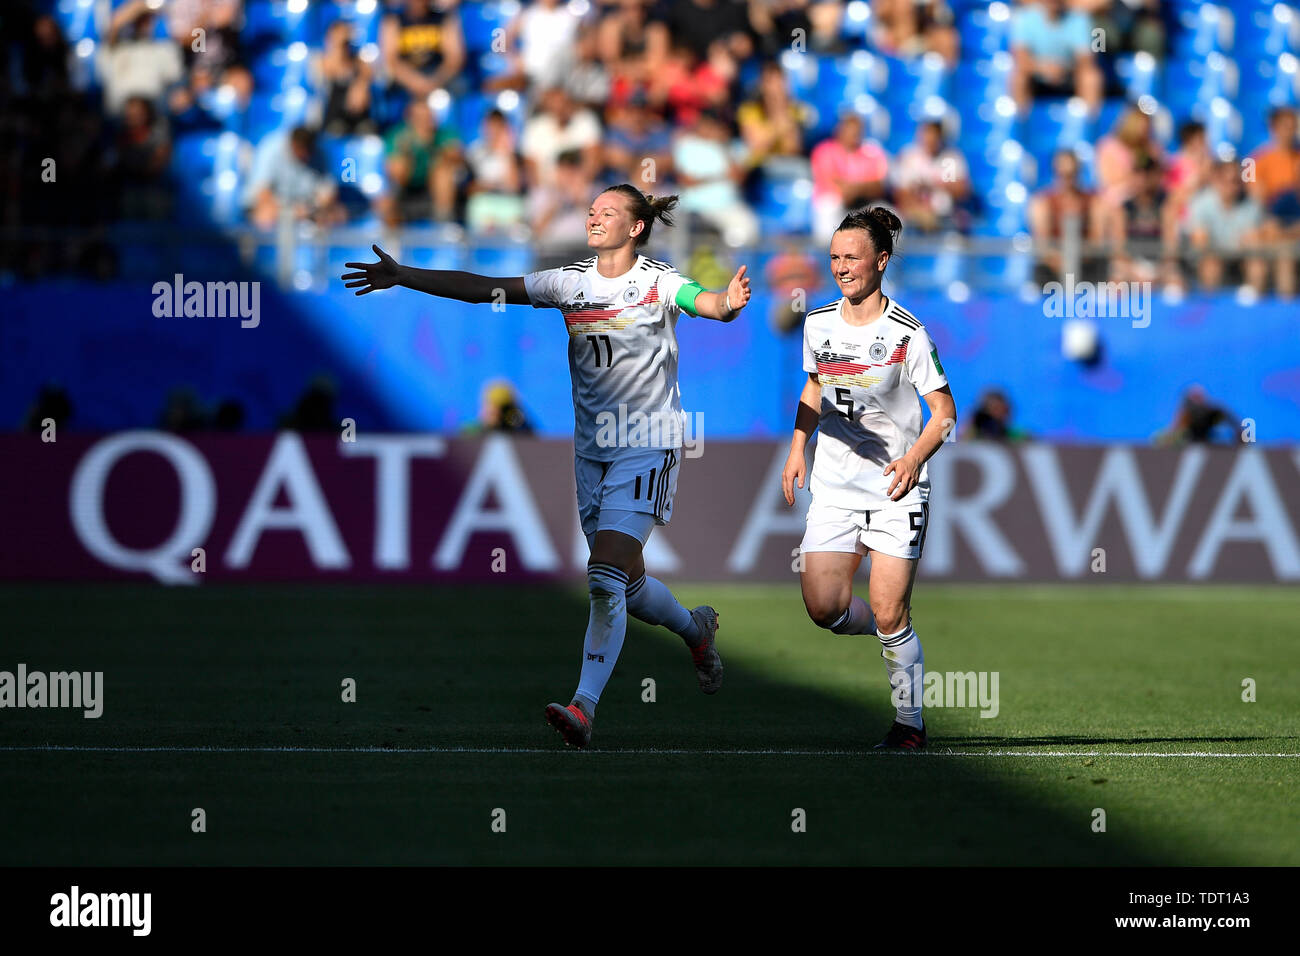 Montpellier. 17th June, 2019. Alexandra Popp (L) of Germany celebrates after scoring during the group B match between Germany and South Africa at the 2019 FIFA Women's World Cup in Montpellier, France on June 17, 2019. Credit: Chen Yichen/Xinhua/Alamy Live News Stock Photo